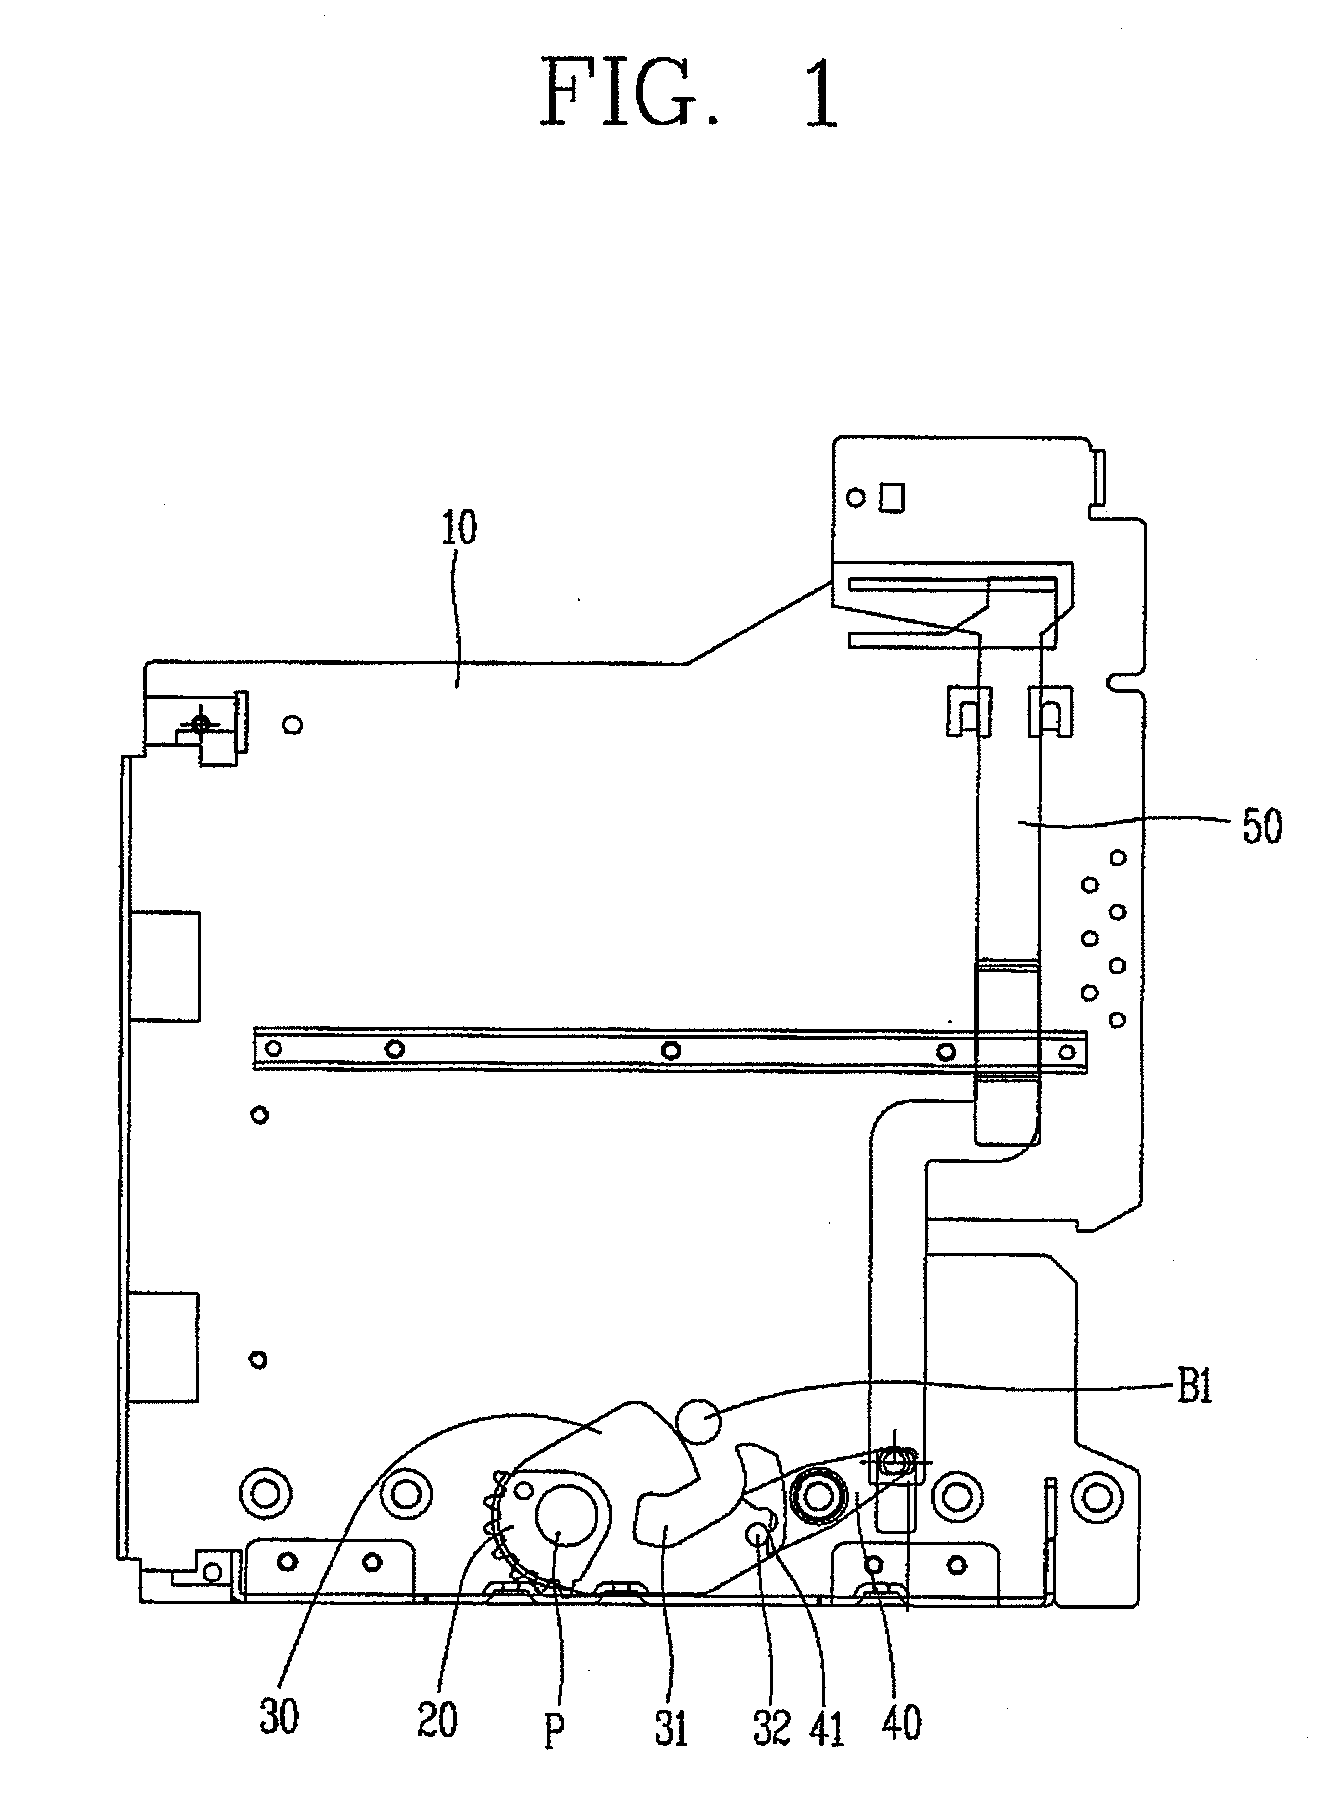 Draw in-out apparatus for air circuit breaker